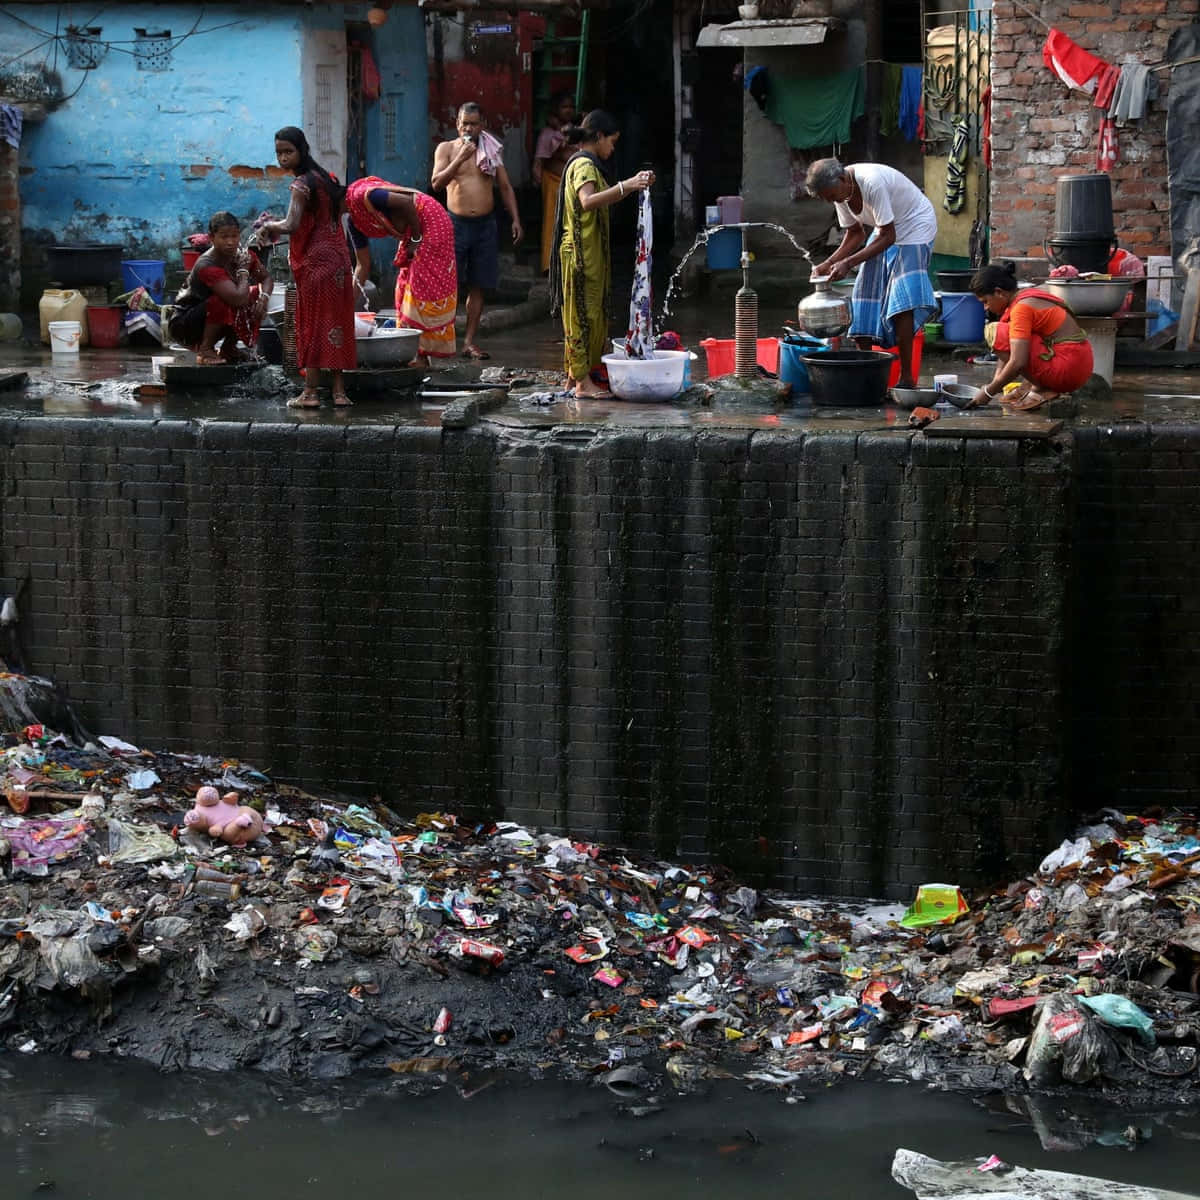 People Are Washing Their Clothes In A Slum